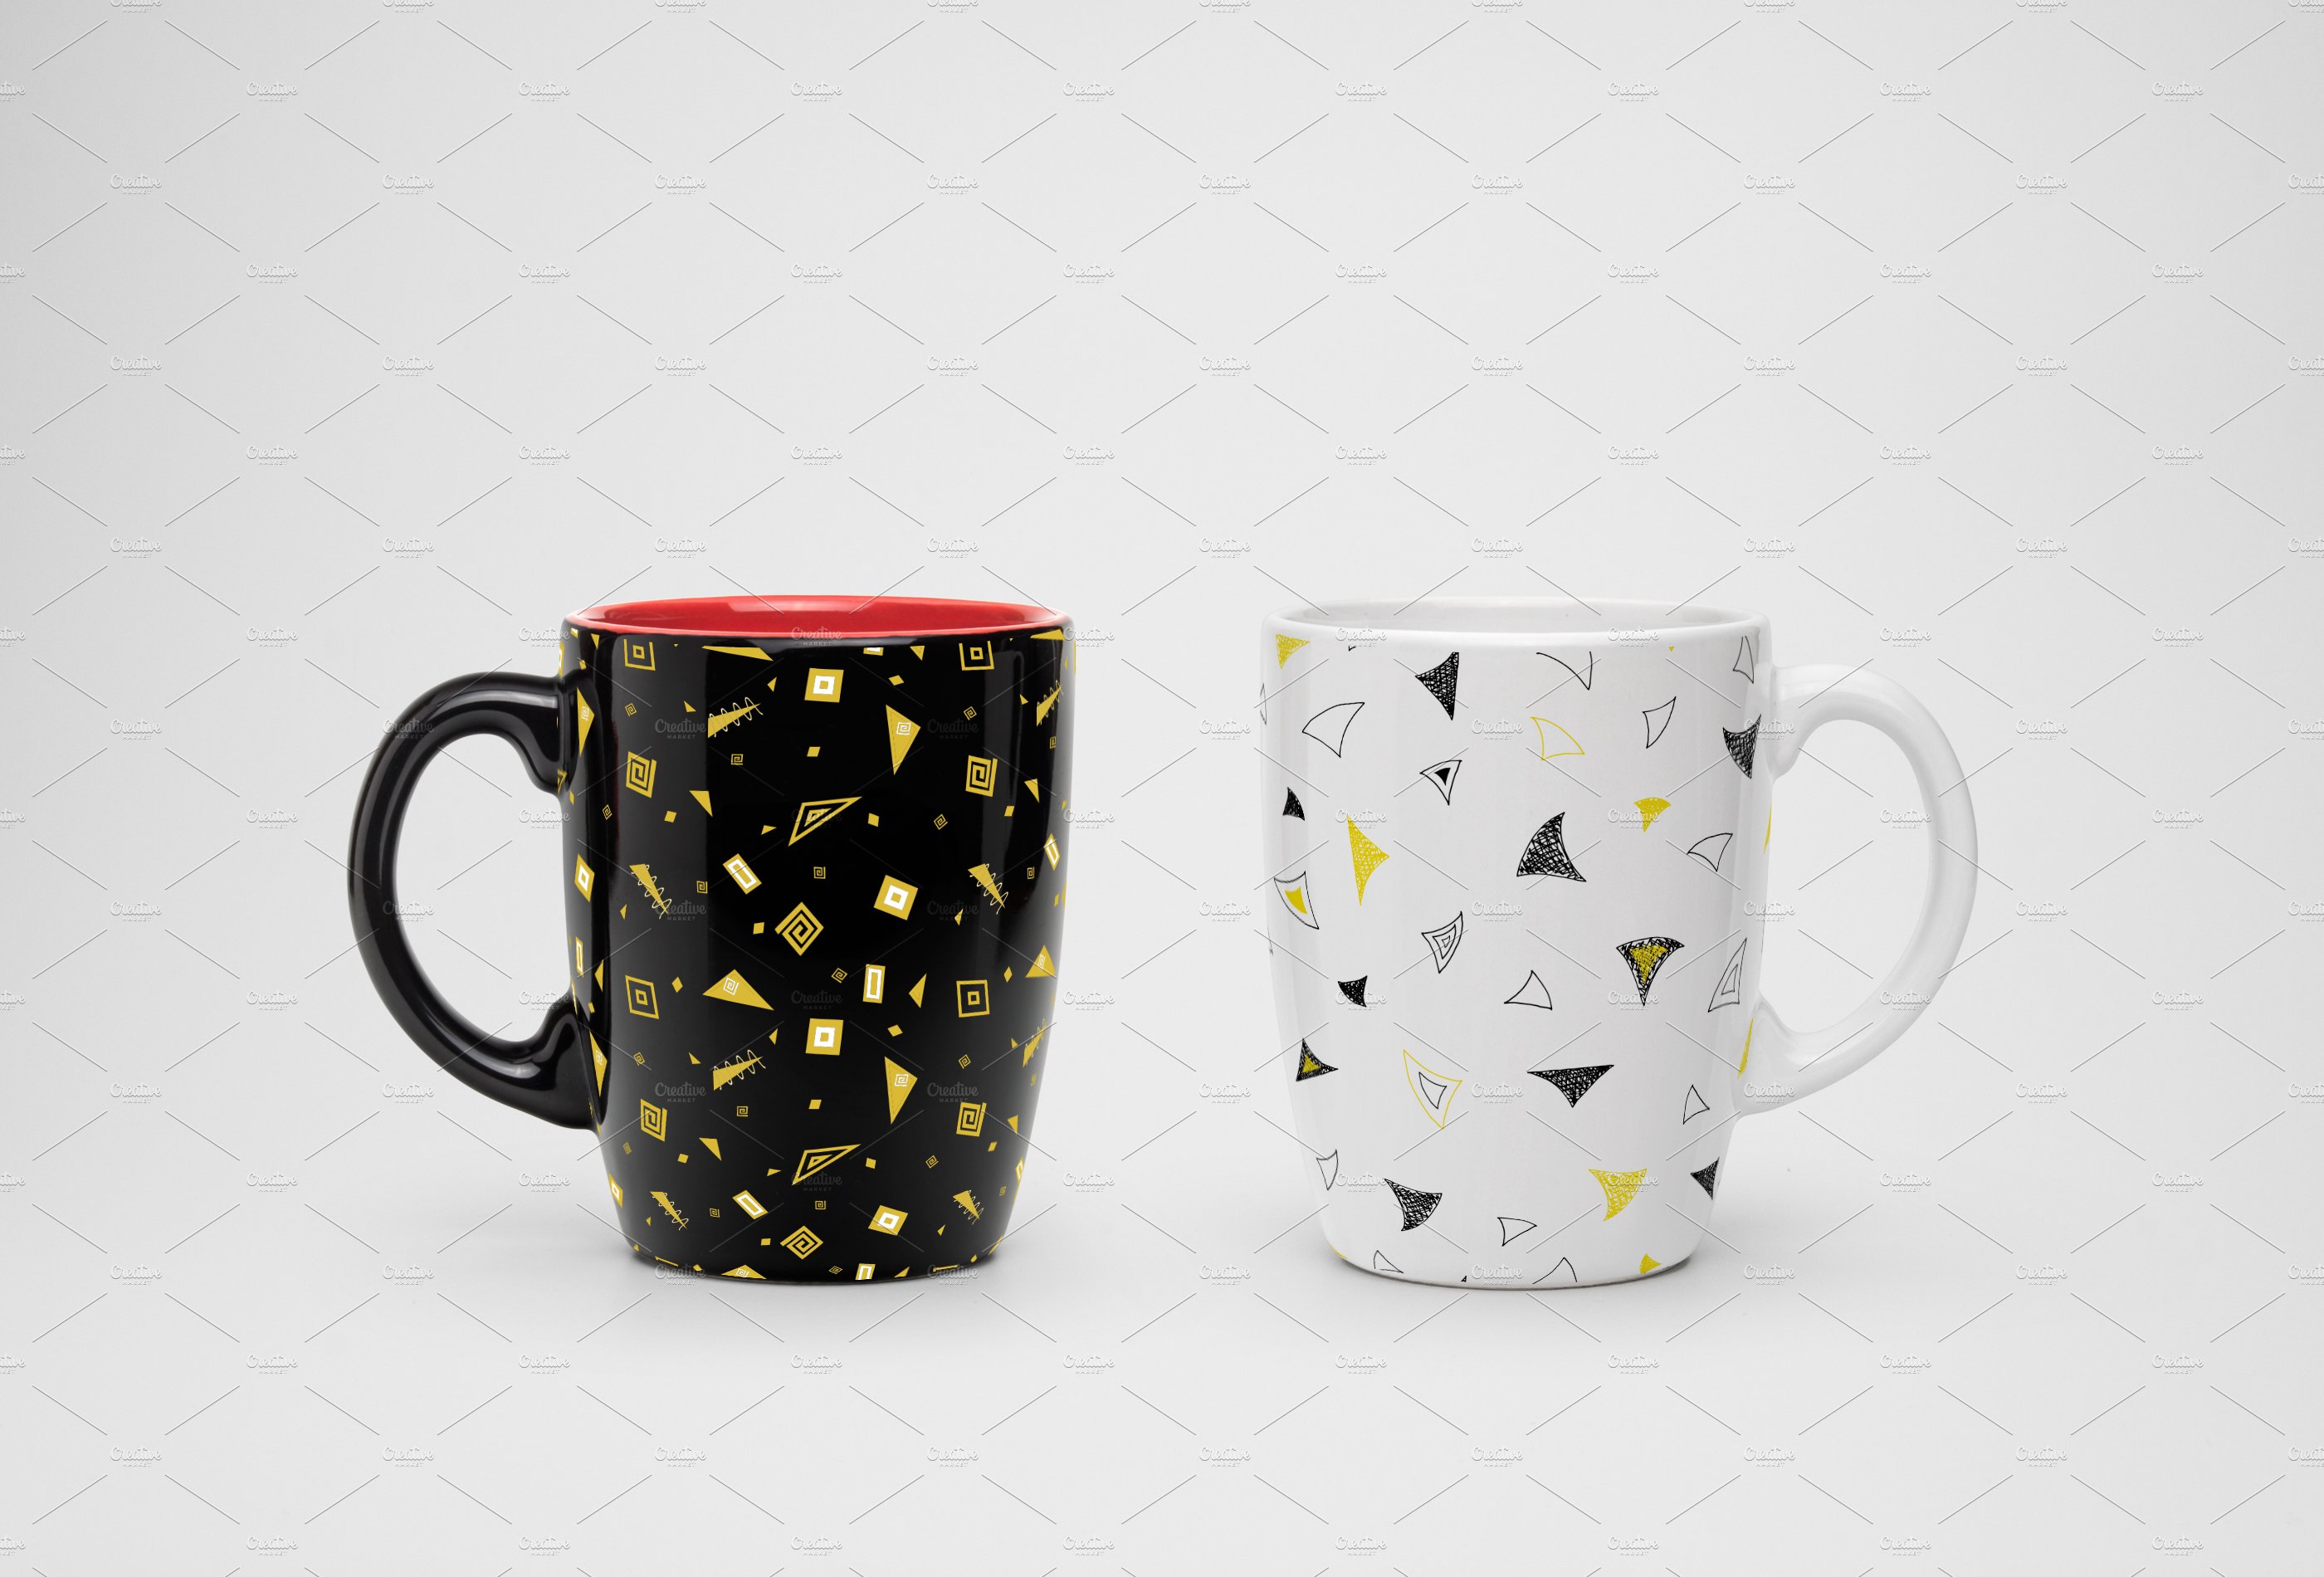 Two cups with the geometric shapes.